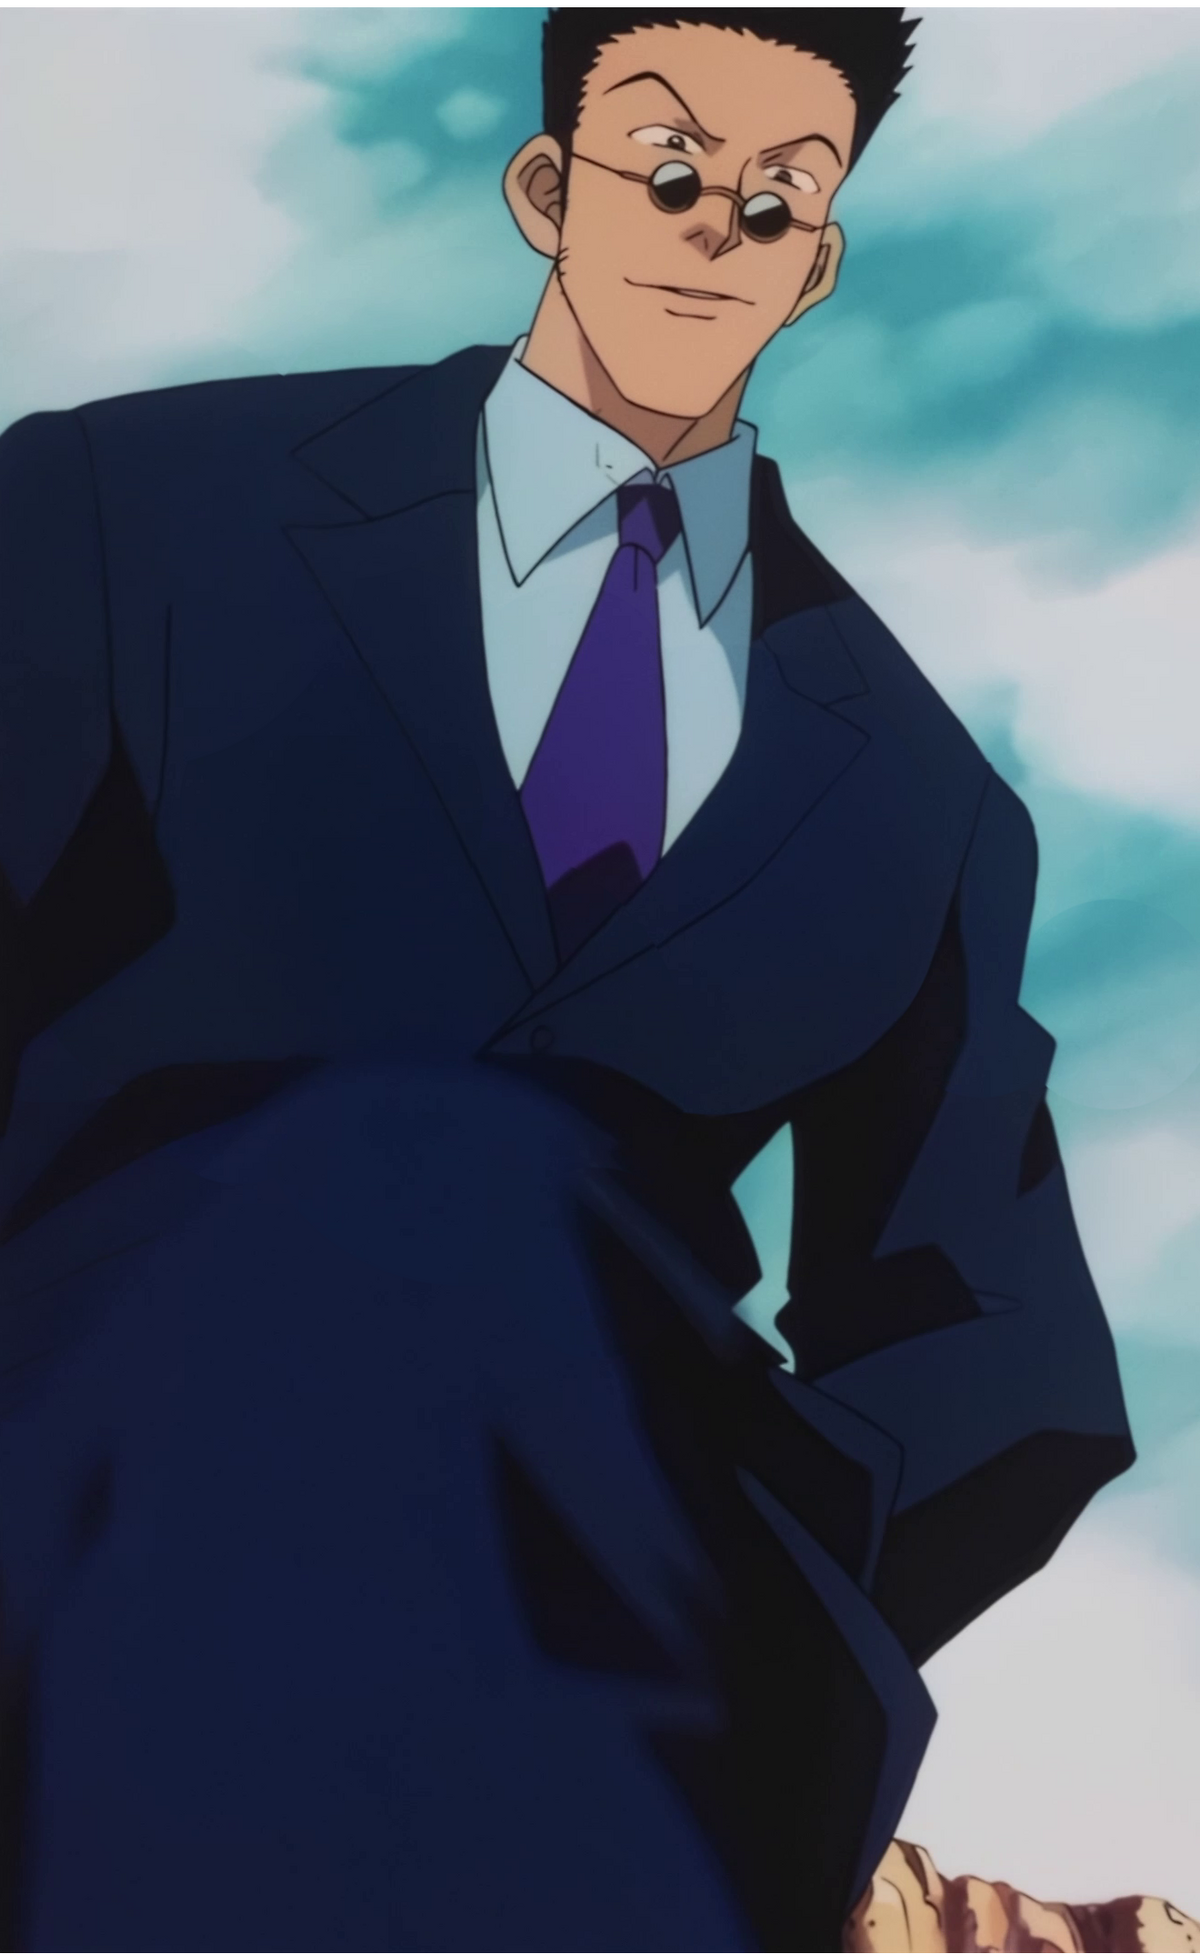 How Tall Is Leorio Paradinight From Hunter X Hunter? - Campione! Anime